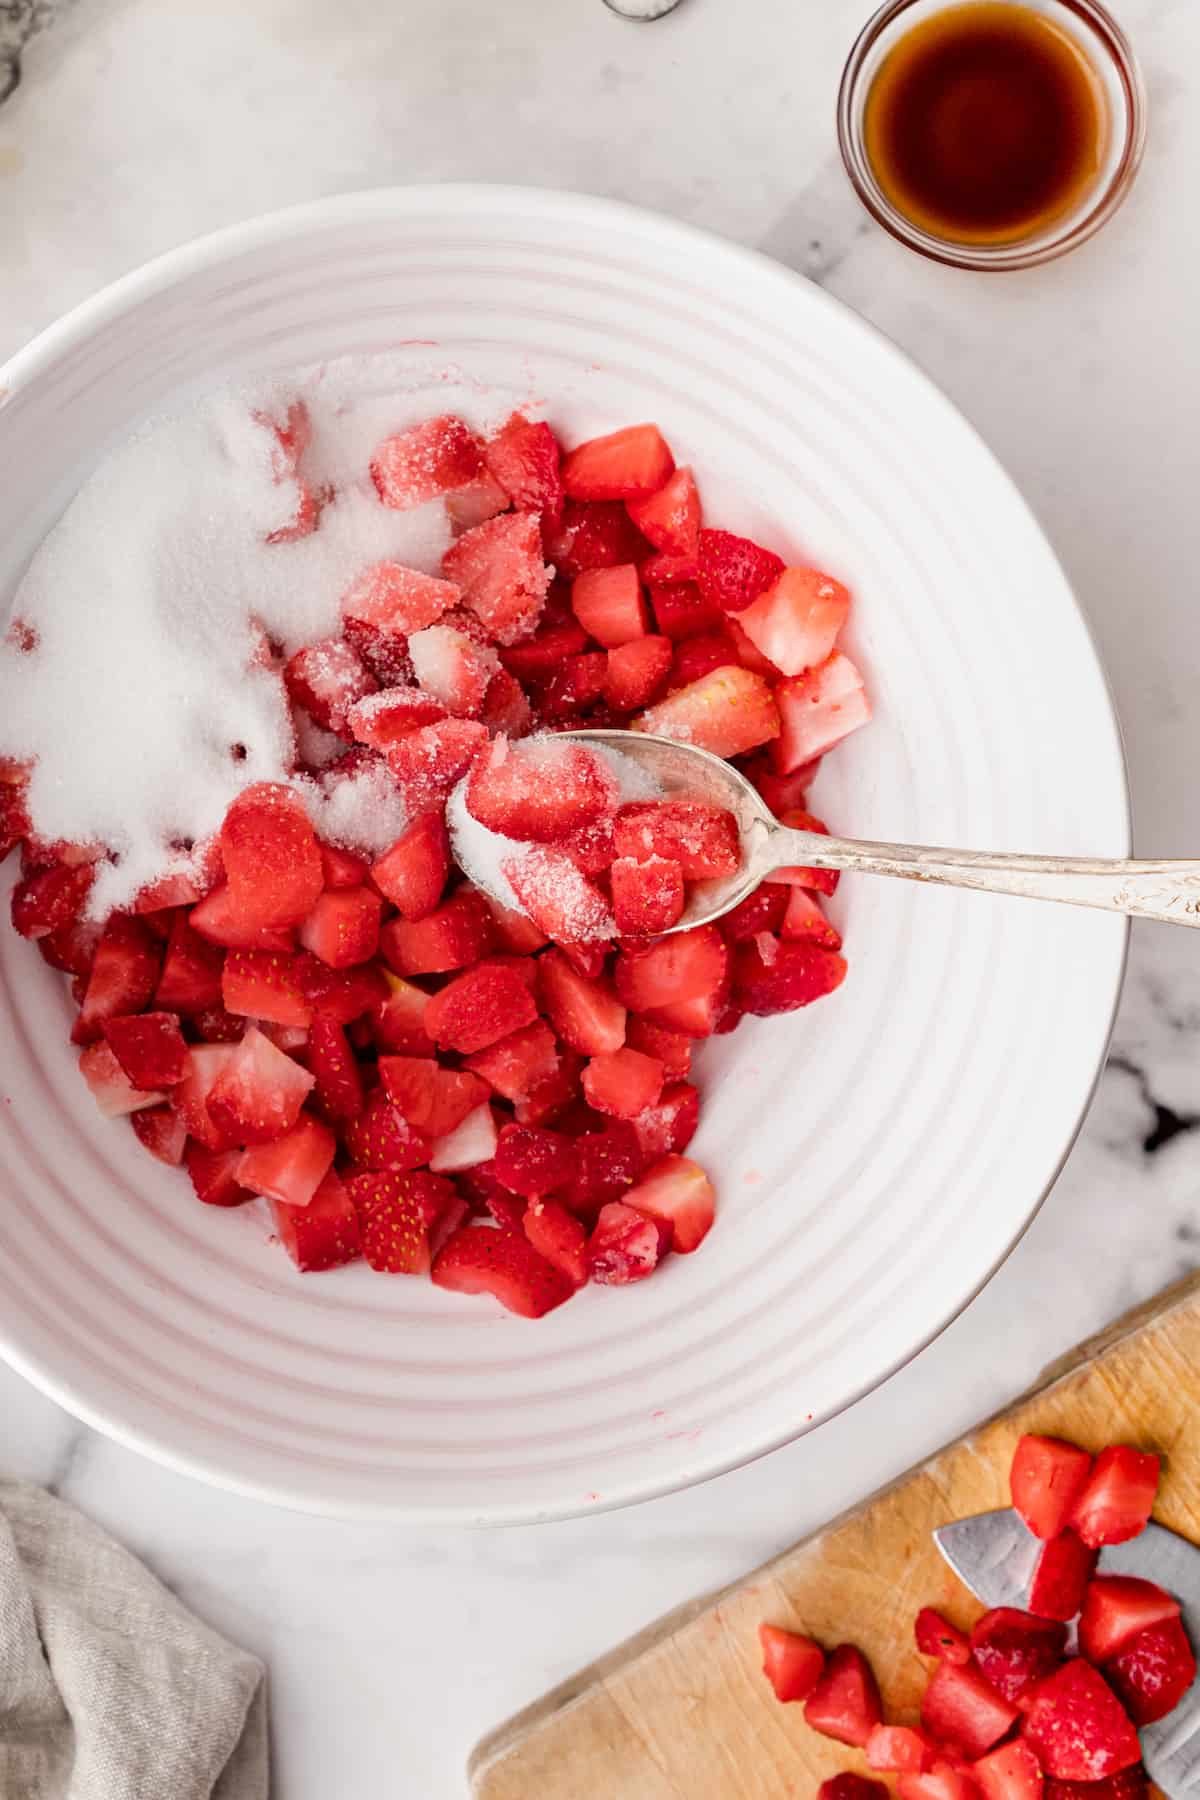 mix the strawberries and sugar